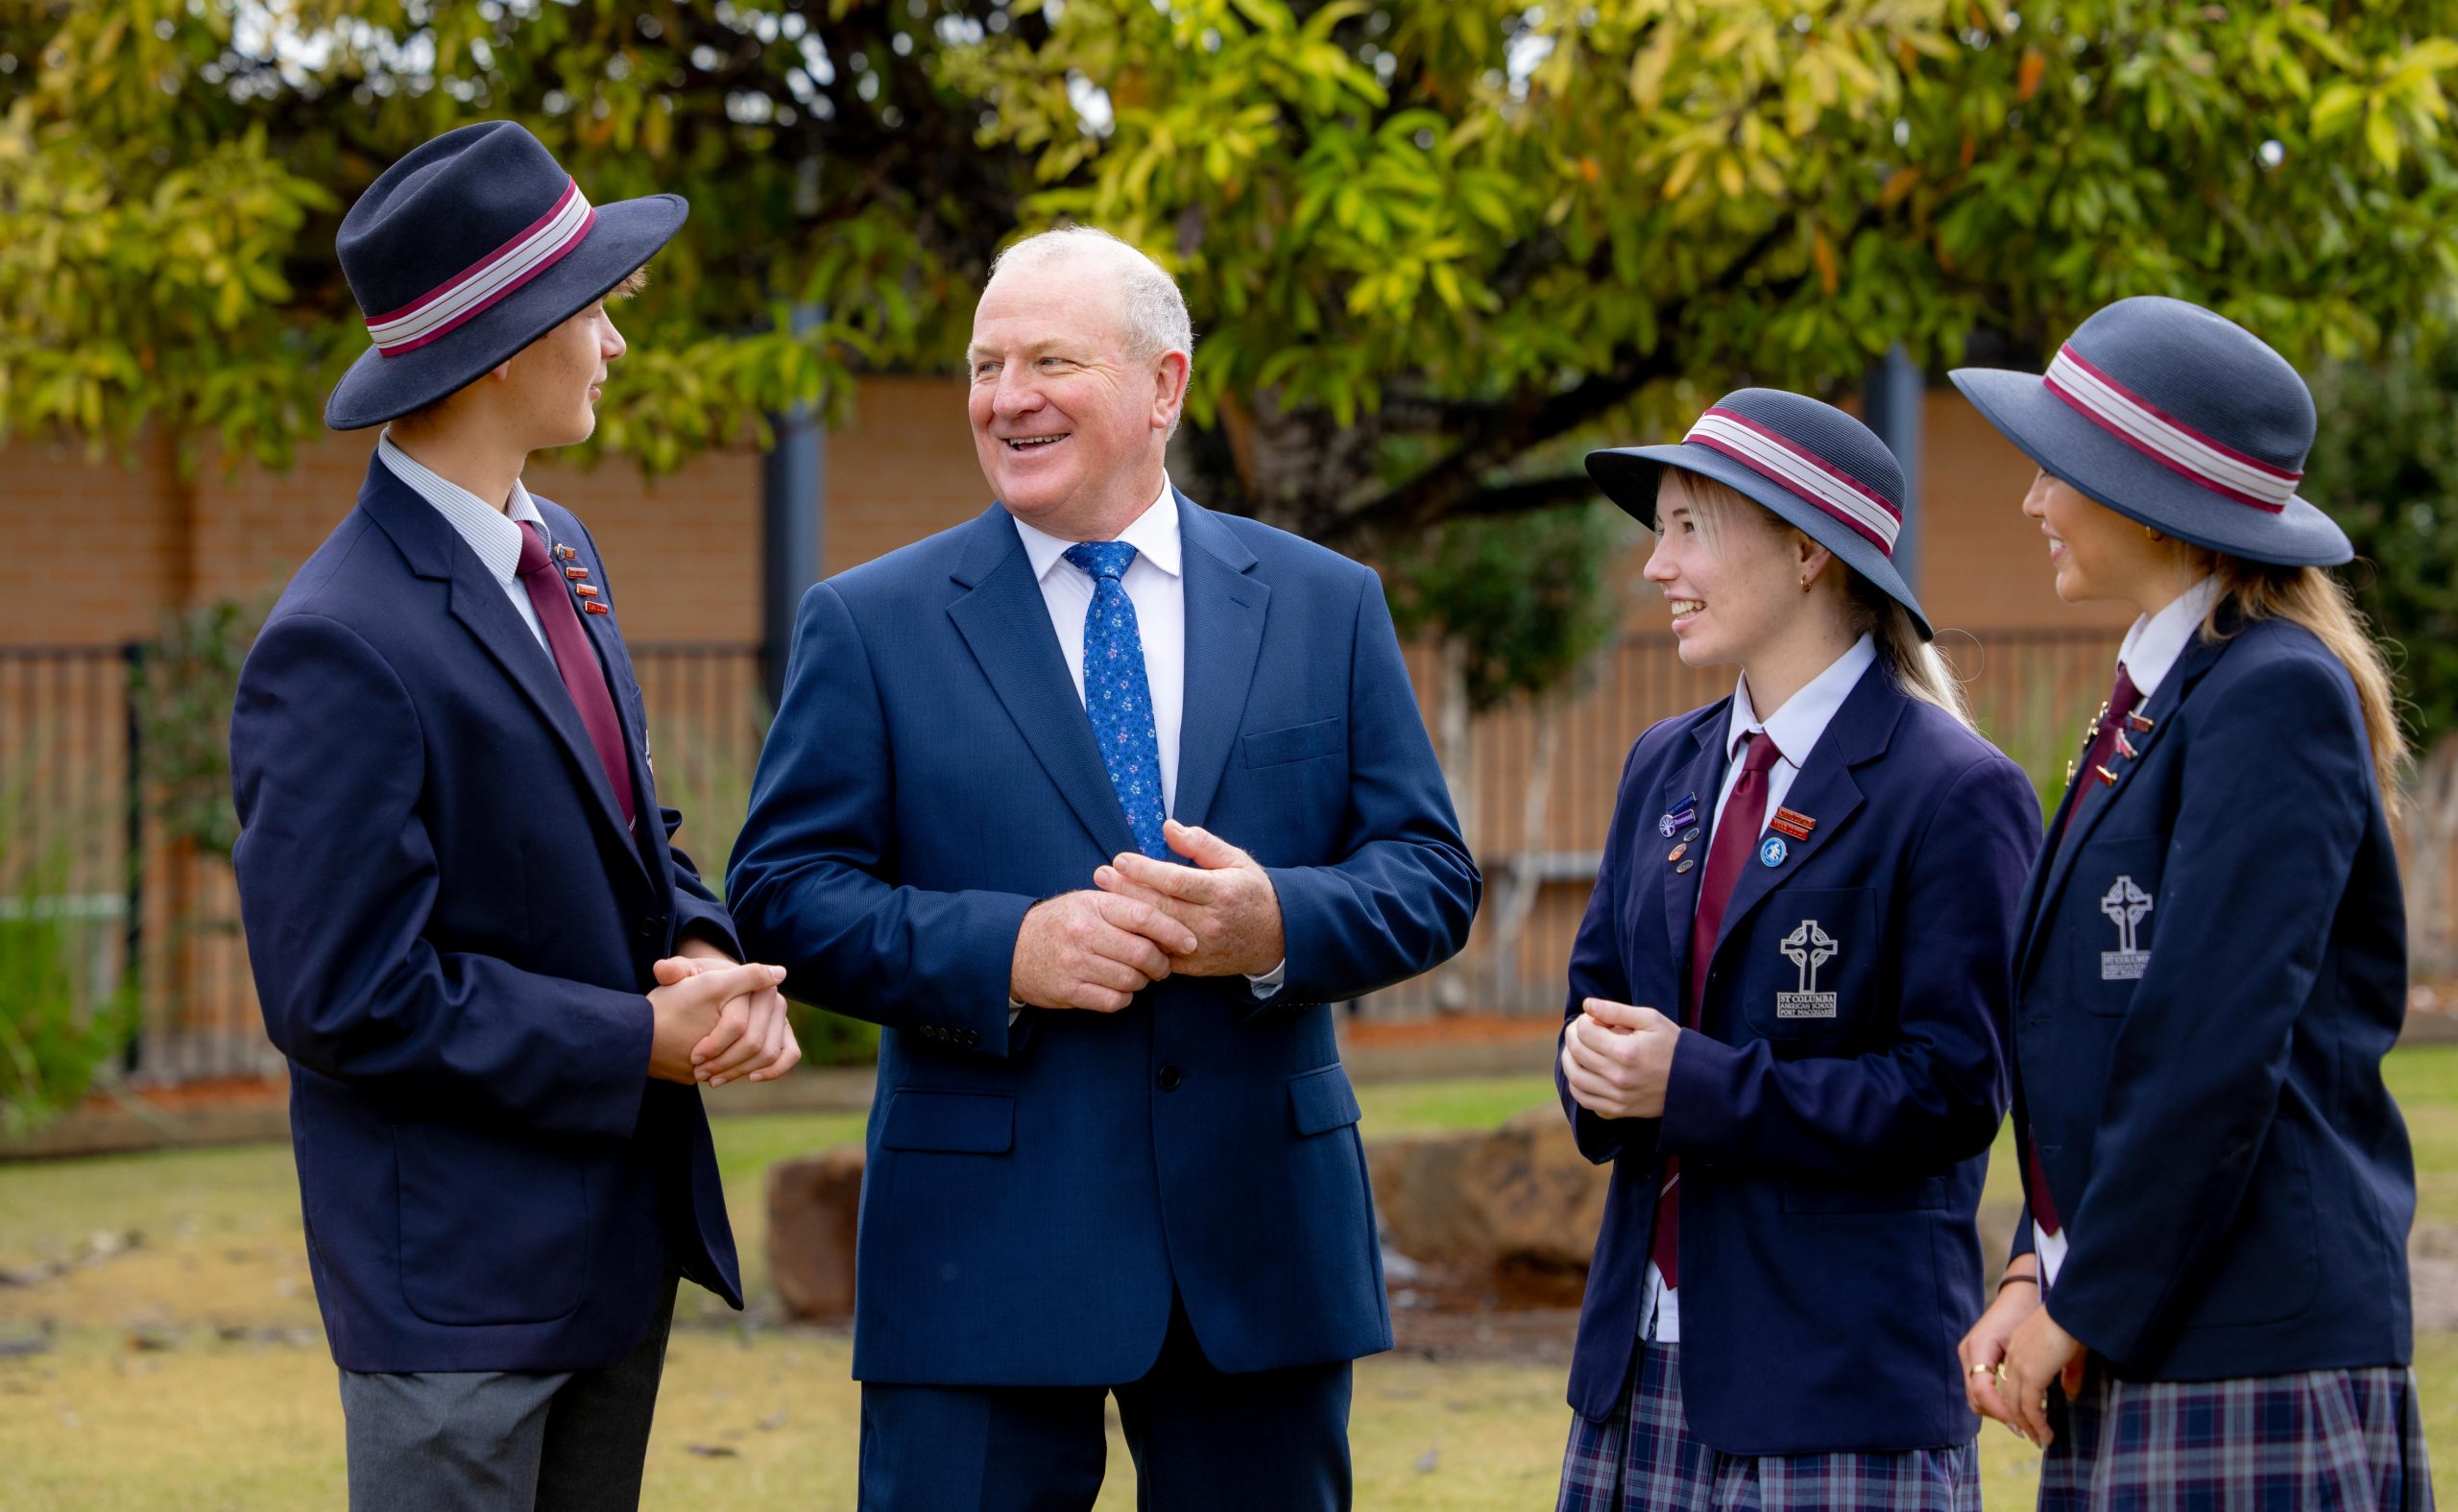 Students in school uniform blazers and hats smile and talk with a teacher outdoors